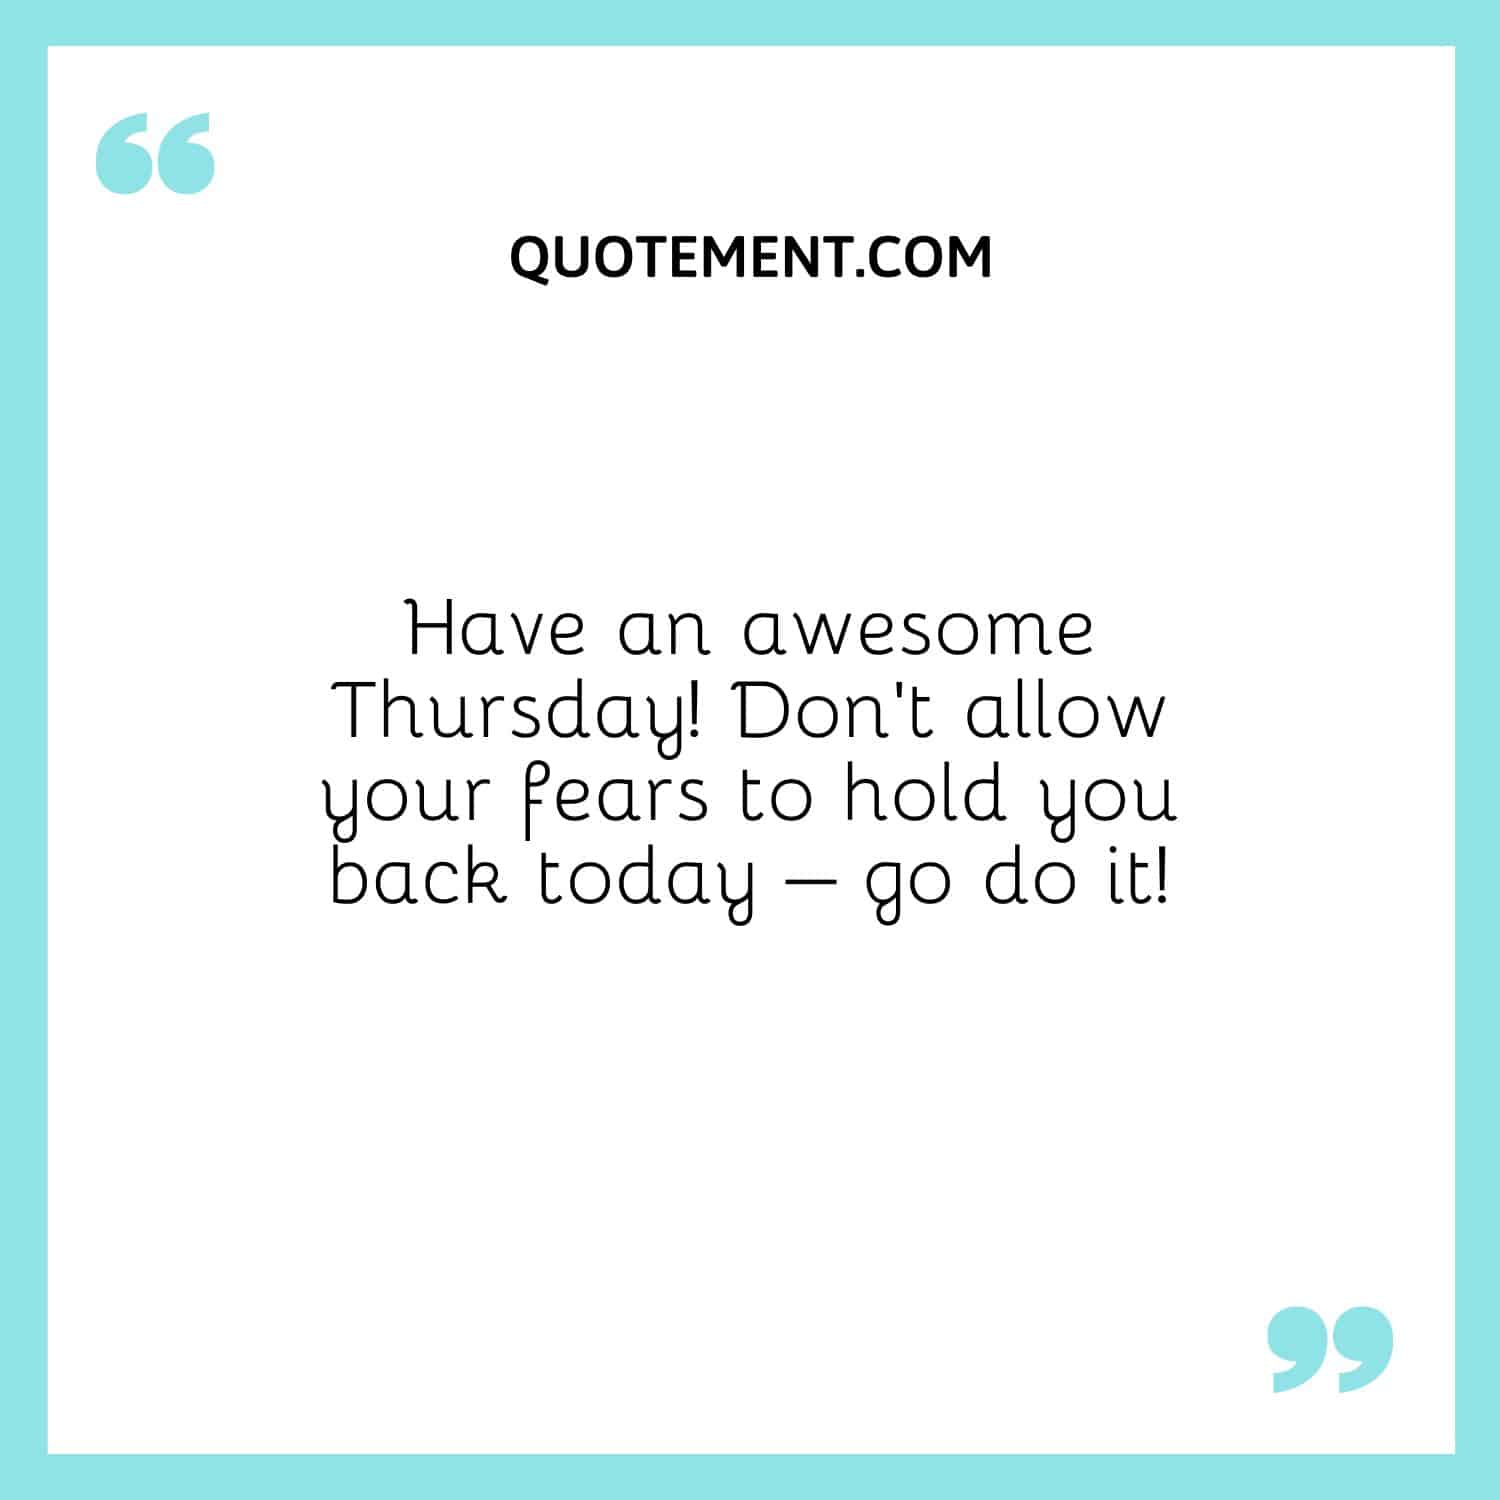 Have an awesome Thursday